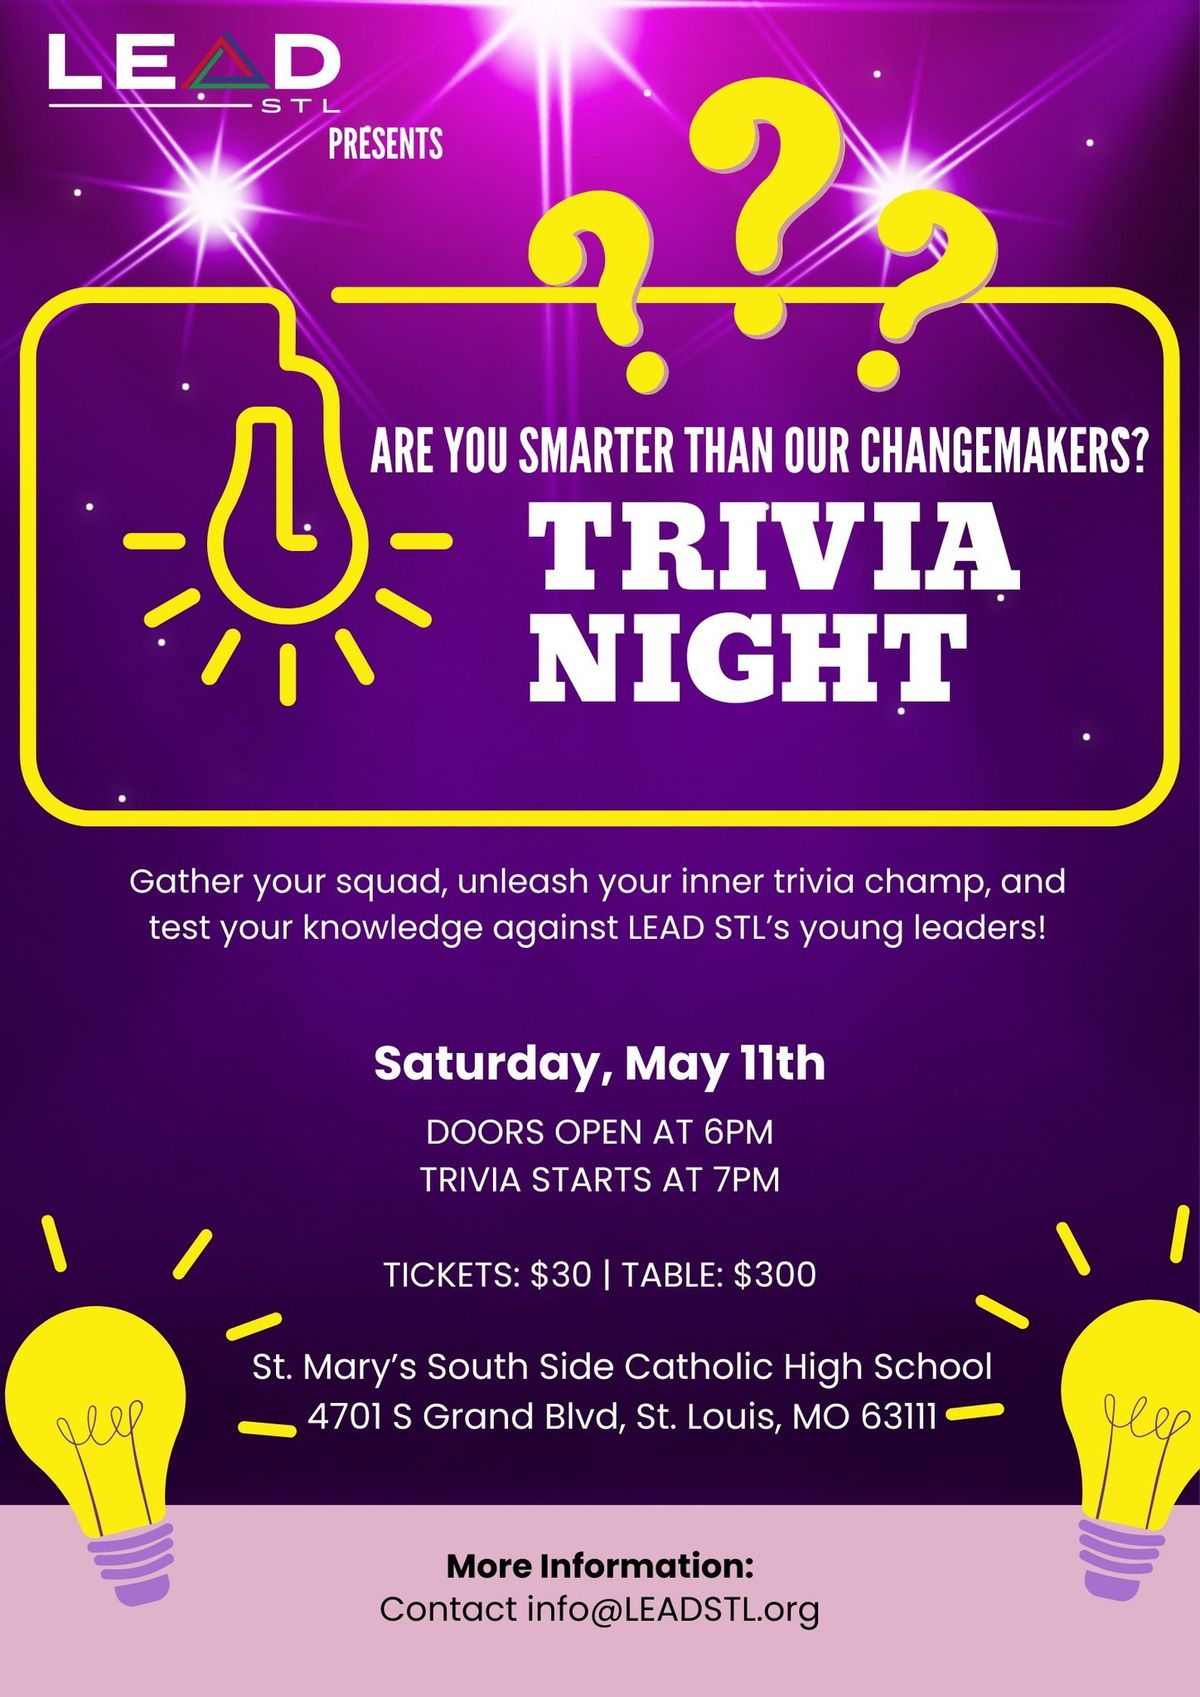 Trivia Night: Are You Smarter Than Our Changemakers?